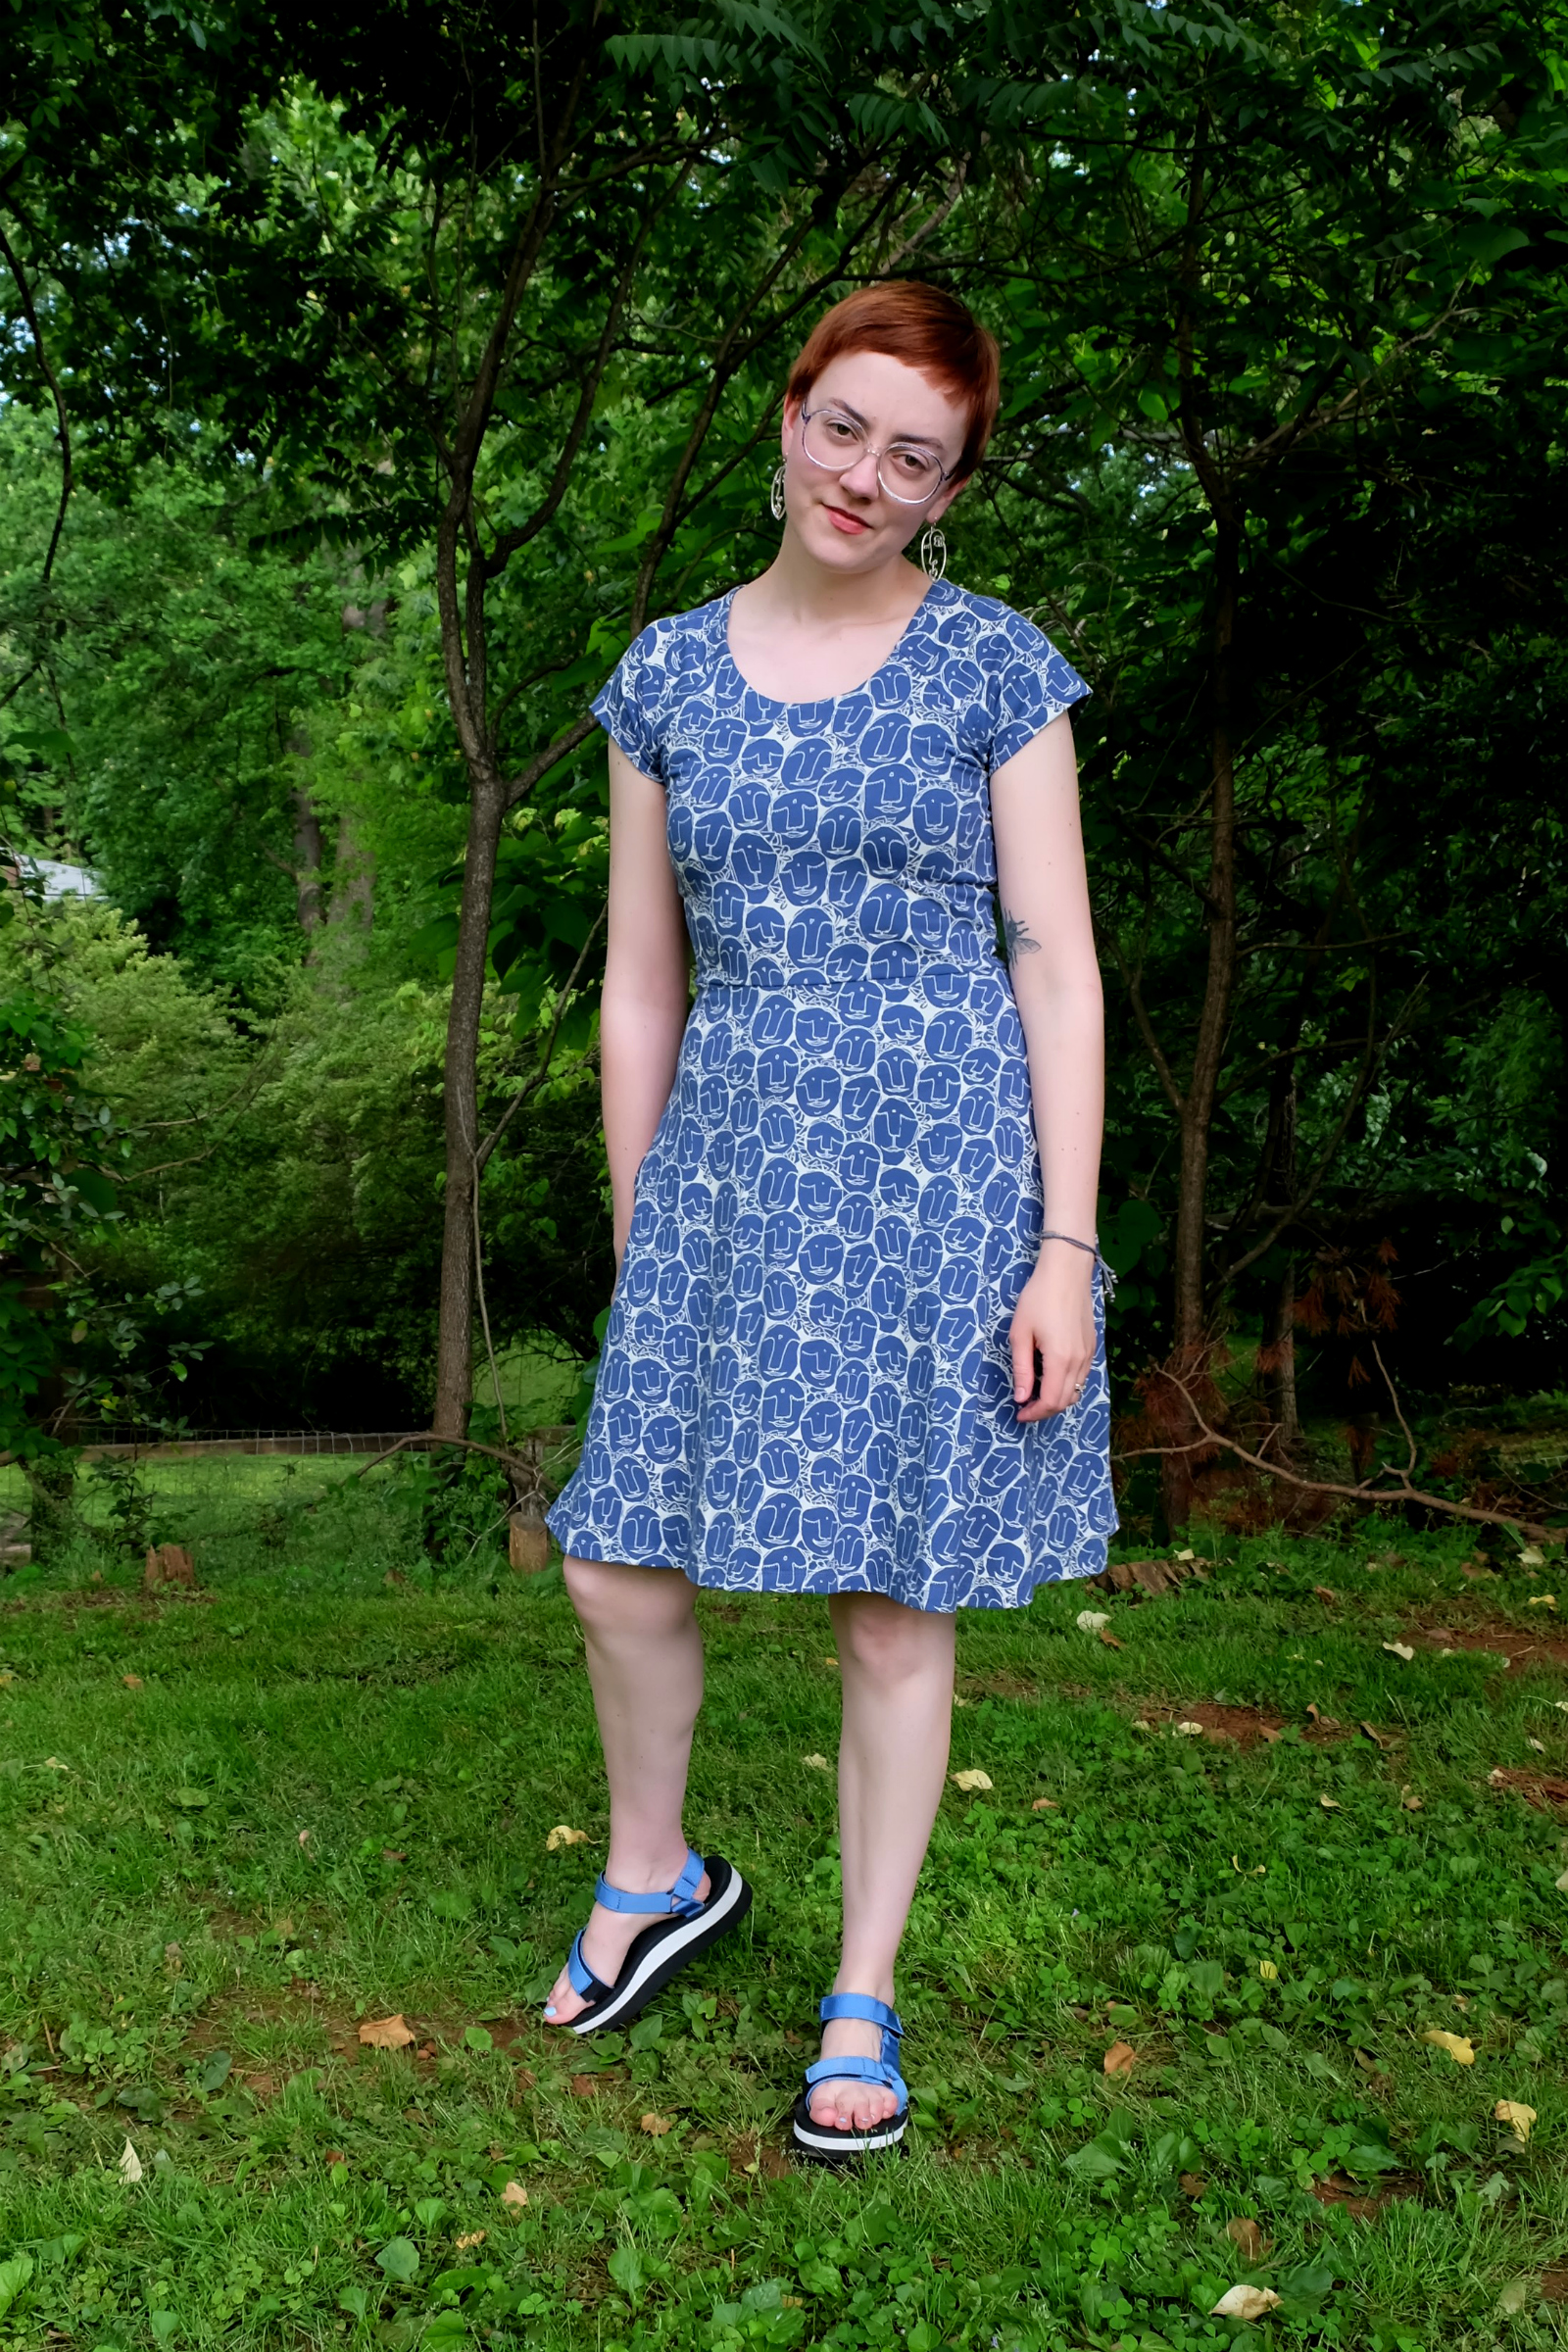 Leah stands in verdant yard wearing a blue dress with faces on it from Mata Traders - Mata Traders Dress